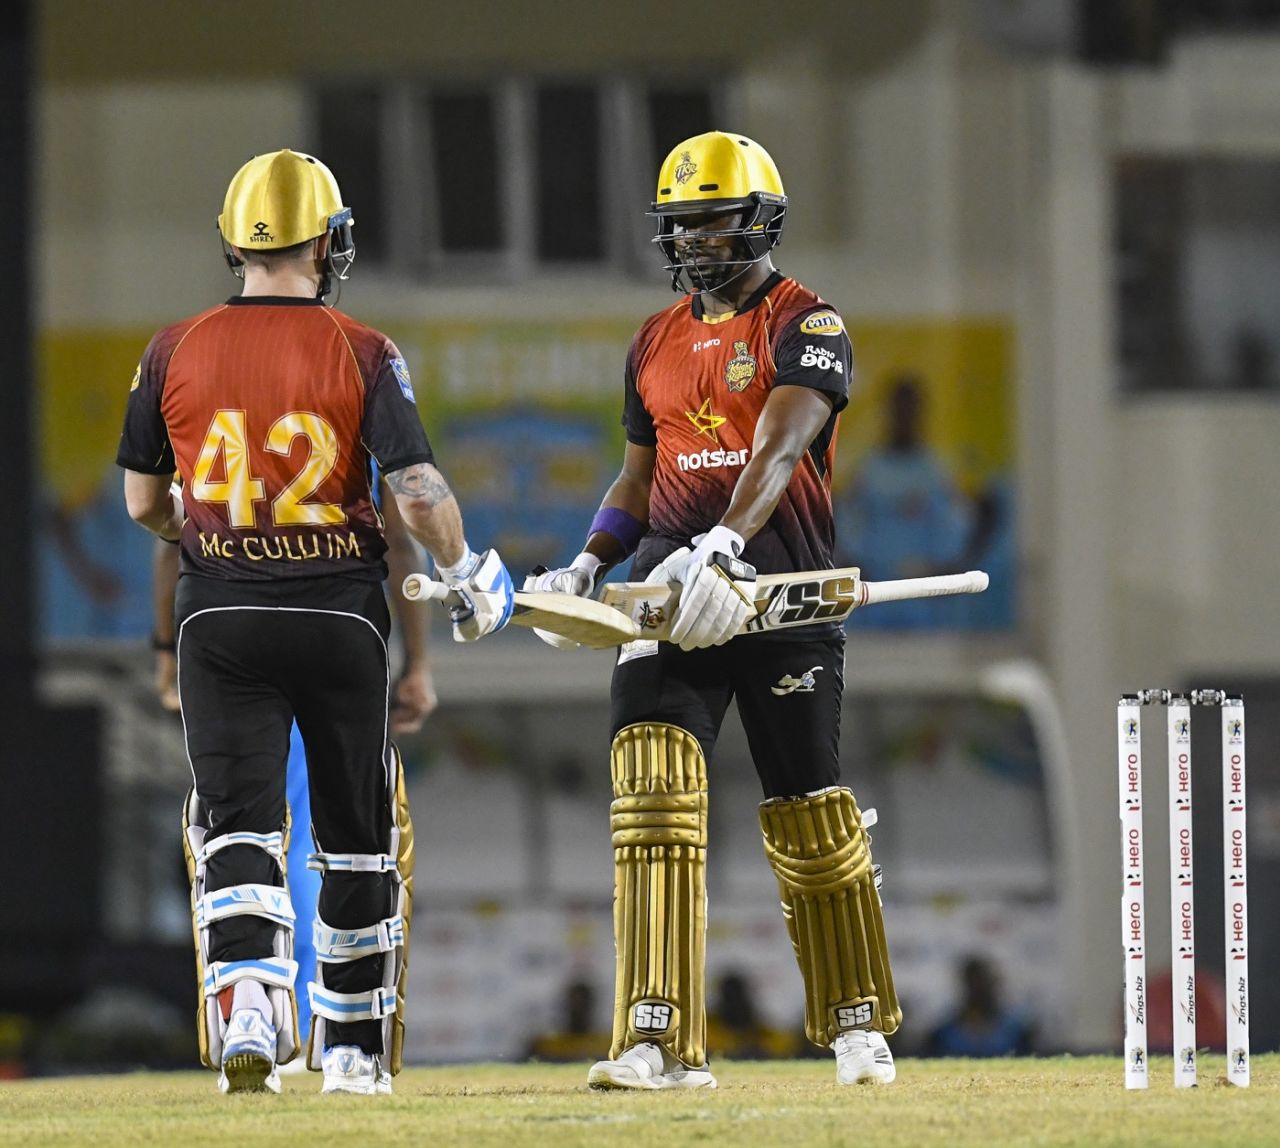 Darren Bravo and Brendon McCullum shared a match-winning stand, ST Lucia Stars v Trinbago Knight Riders, Gros Islet, August 16, 2018